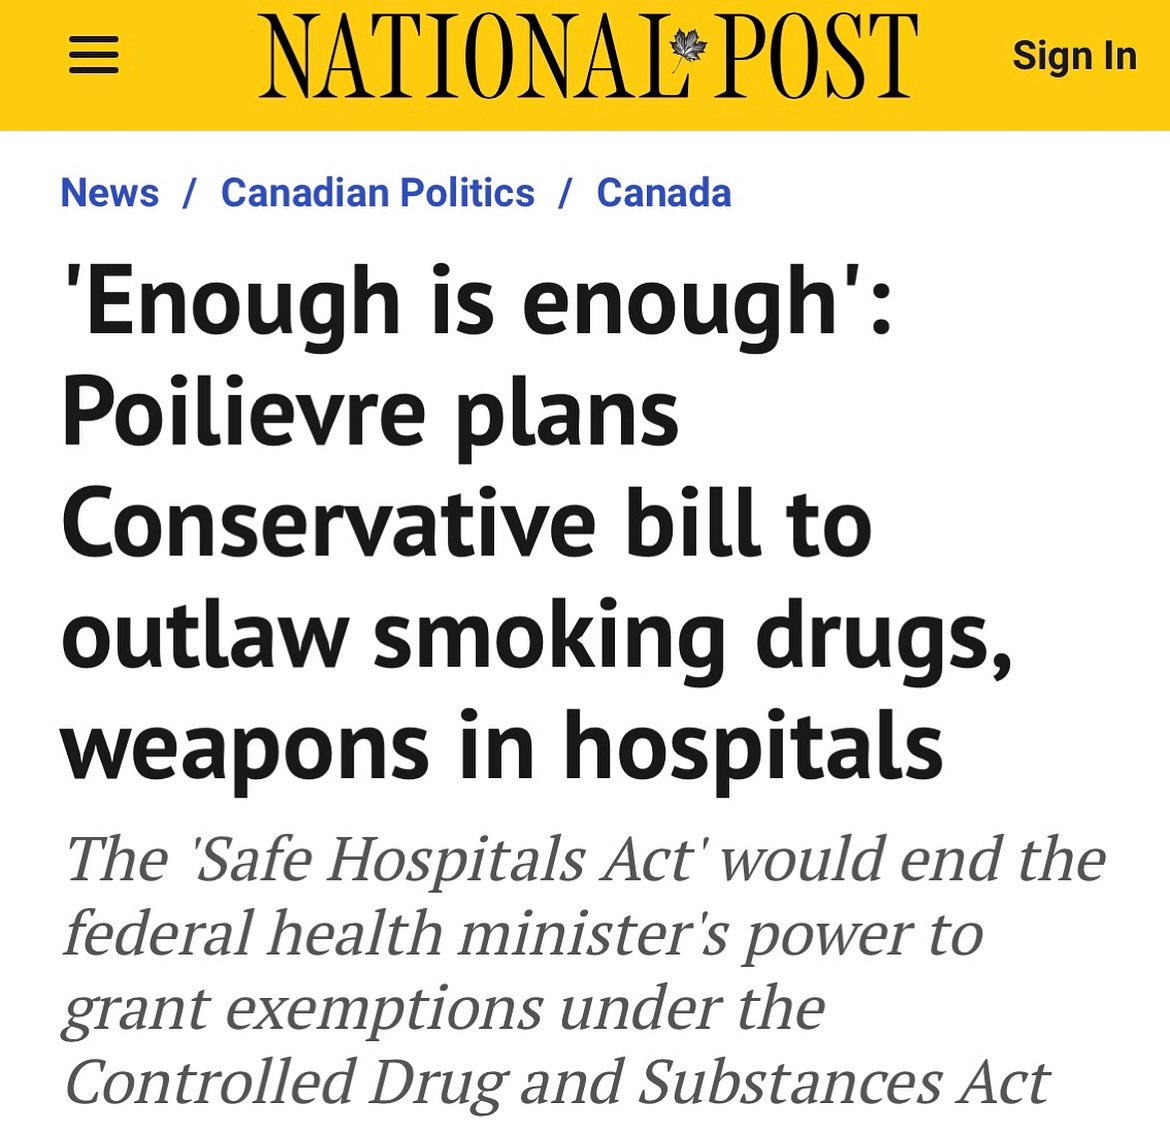 Before Justin Trudeau, hospitals were sanctuaries of safety and care. After 9 years of his radical agenda, they have become places of lawlessness and chaos. Only Conservatives will protect our hospitals and healthcare workers by toughening sentences for criminals who bring in